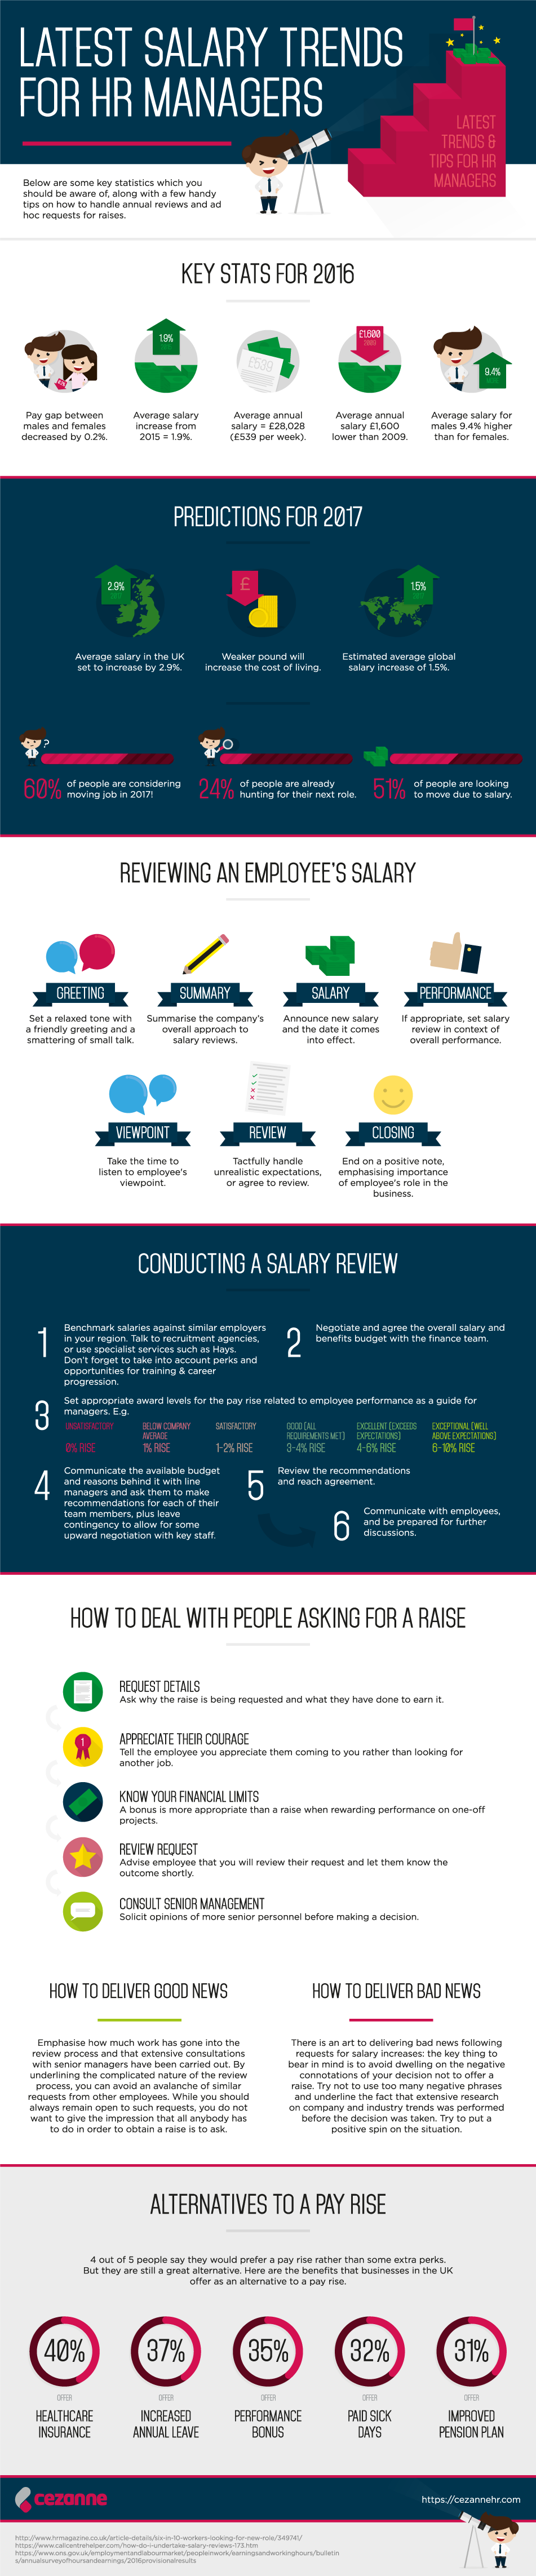 Latest Salary Trends for HR Managers